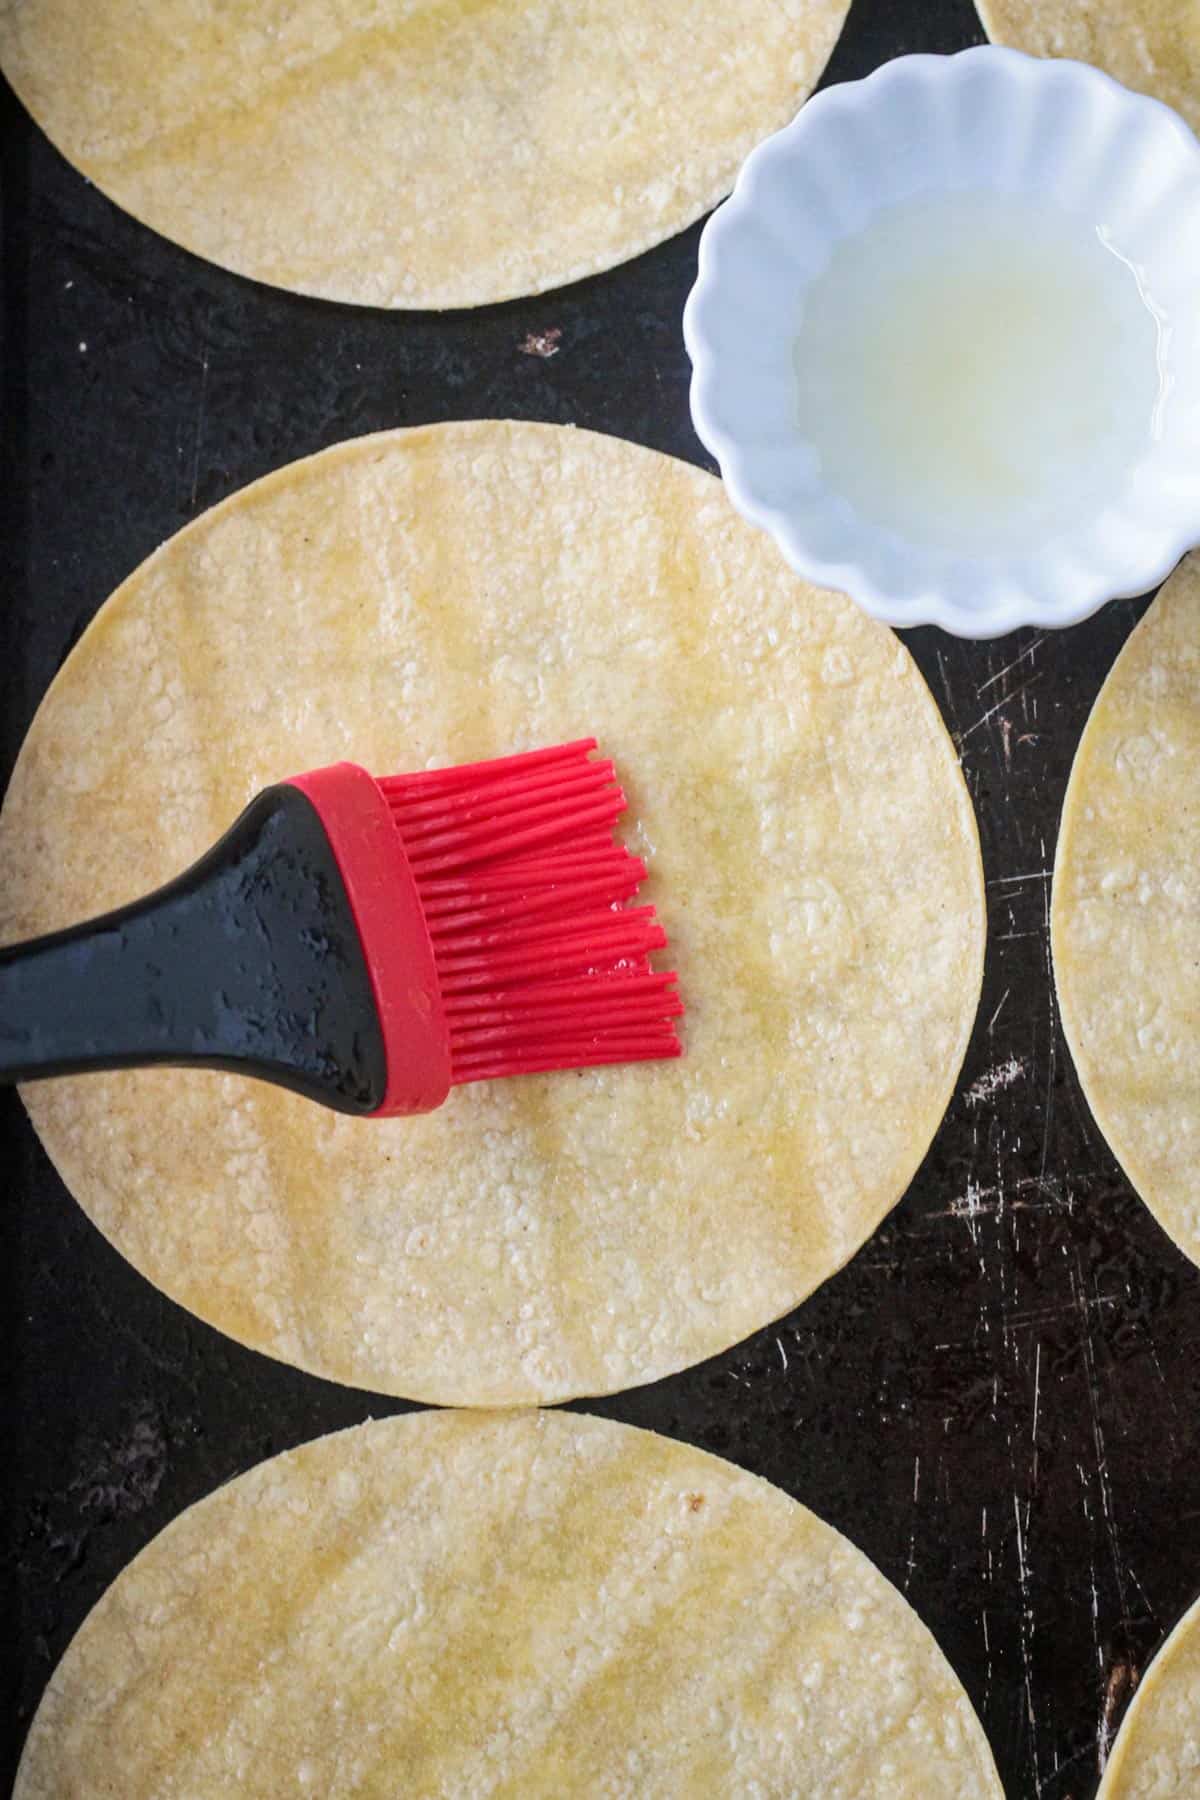 Silicone pastry brush brushing oil onto a tortilla.